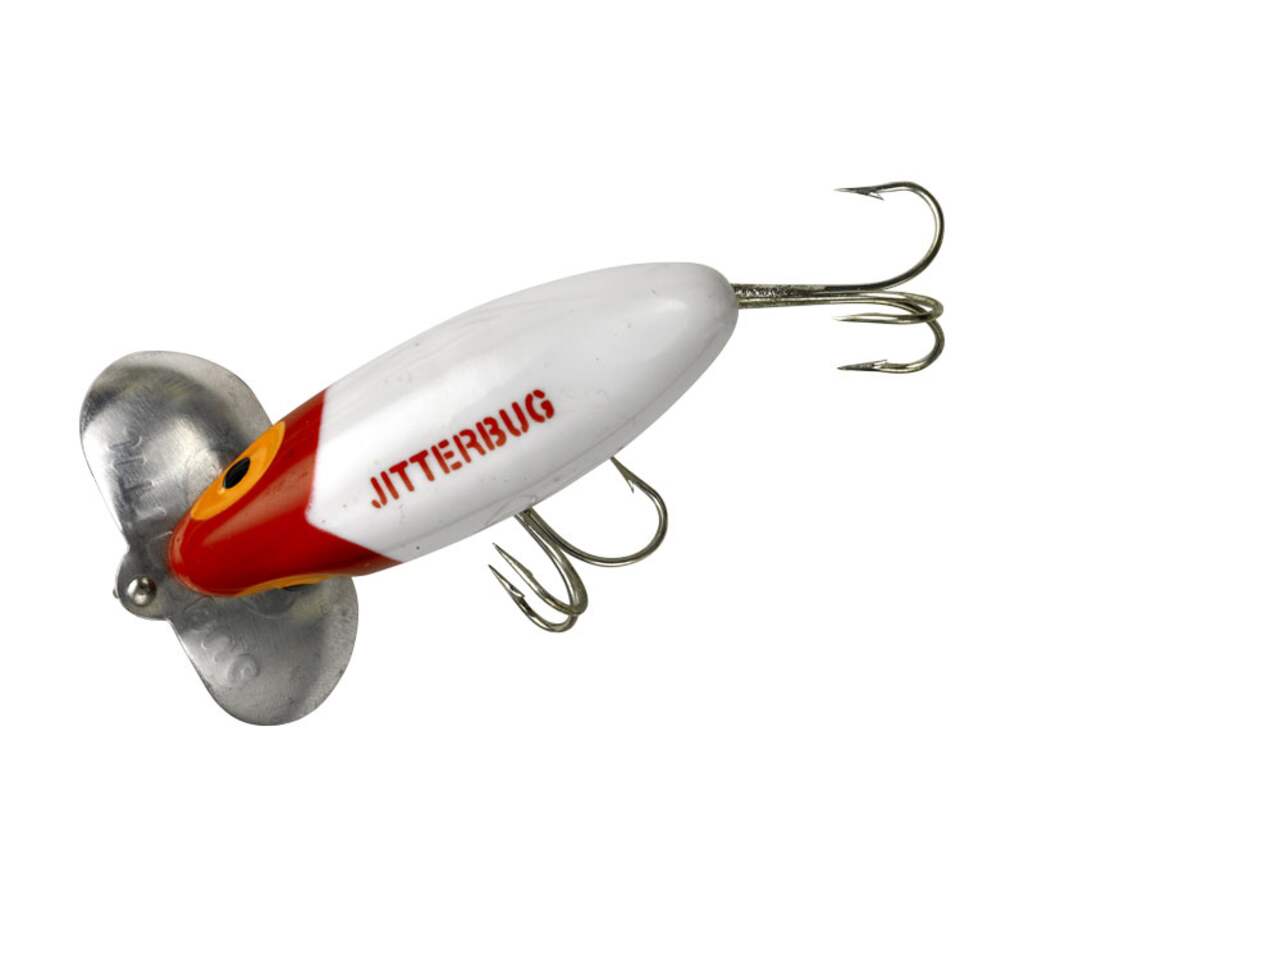 Rebel Crickhopper Fishing Lure, Fire Tiger, 1/2 in, Topwater Lures -   Canada